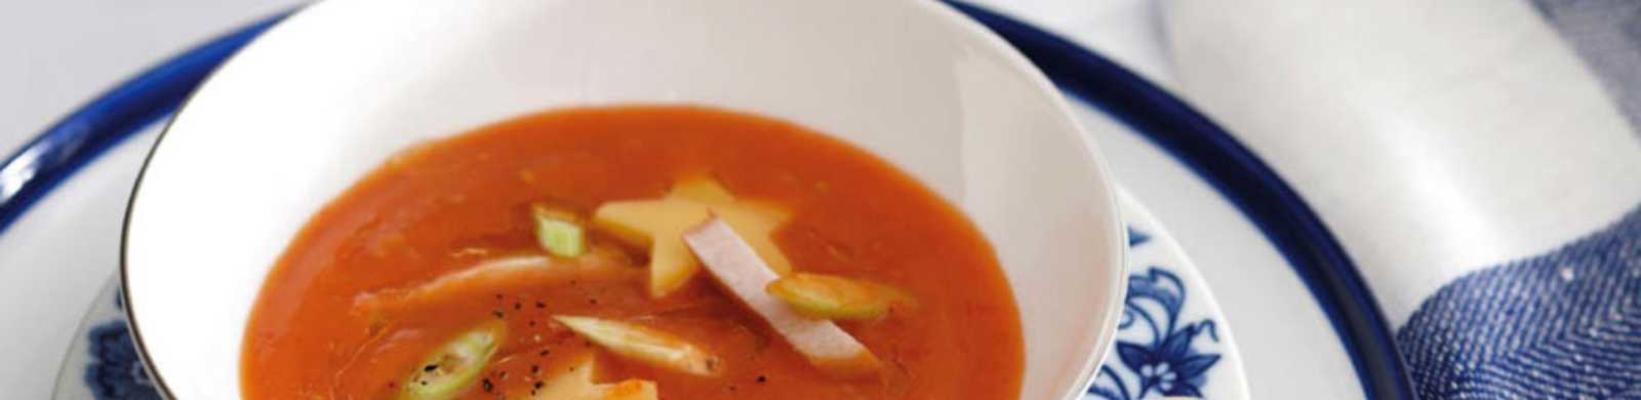 roasted tomato soup with chicken and cheese stars